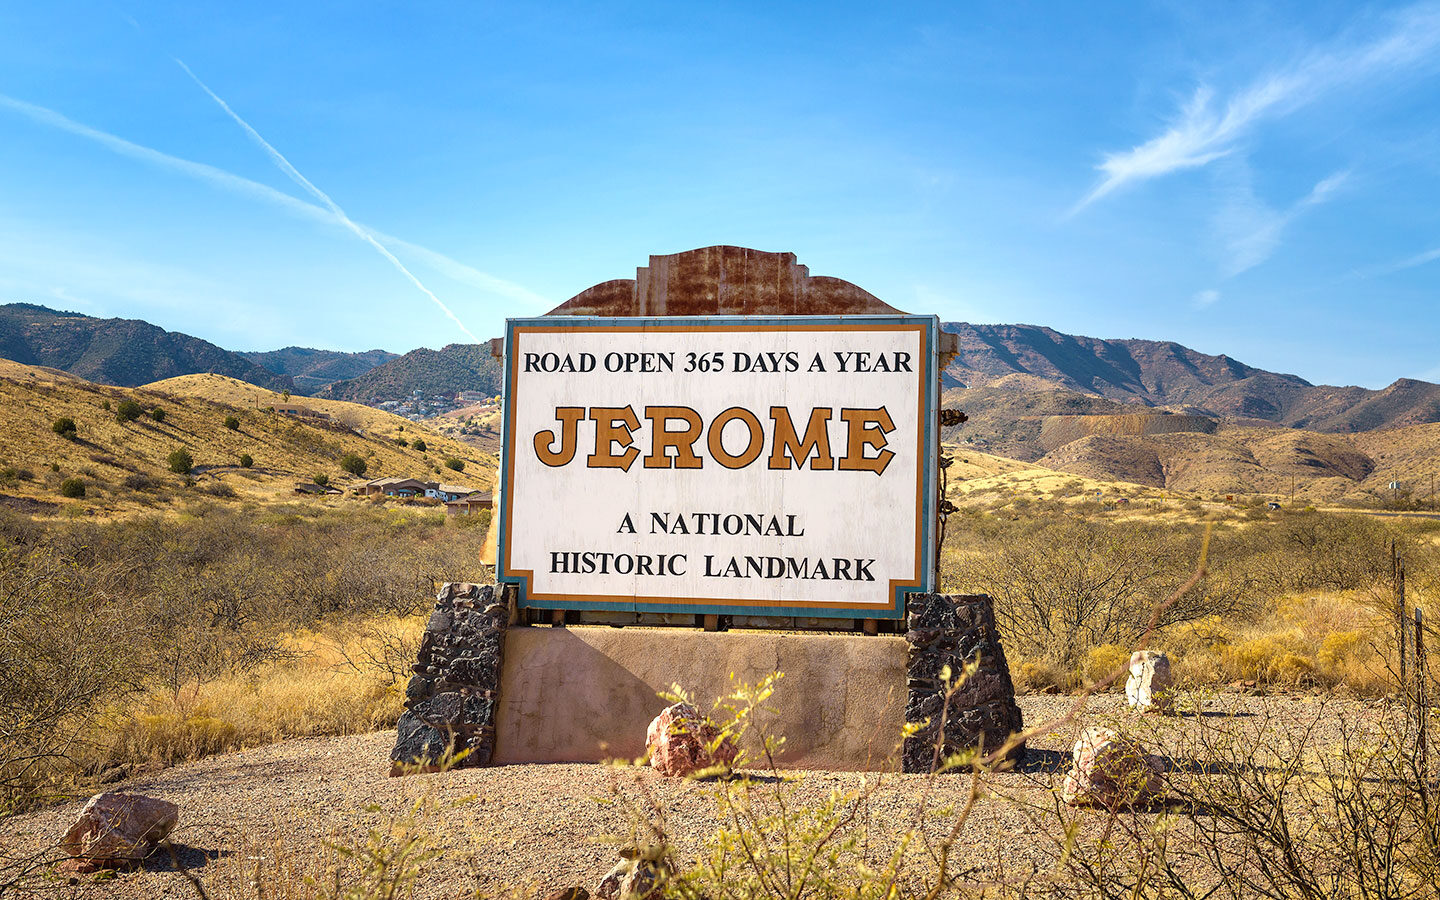 Sign for the town of Jerome, Arizona